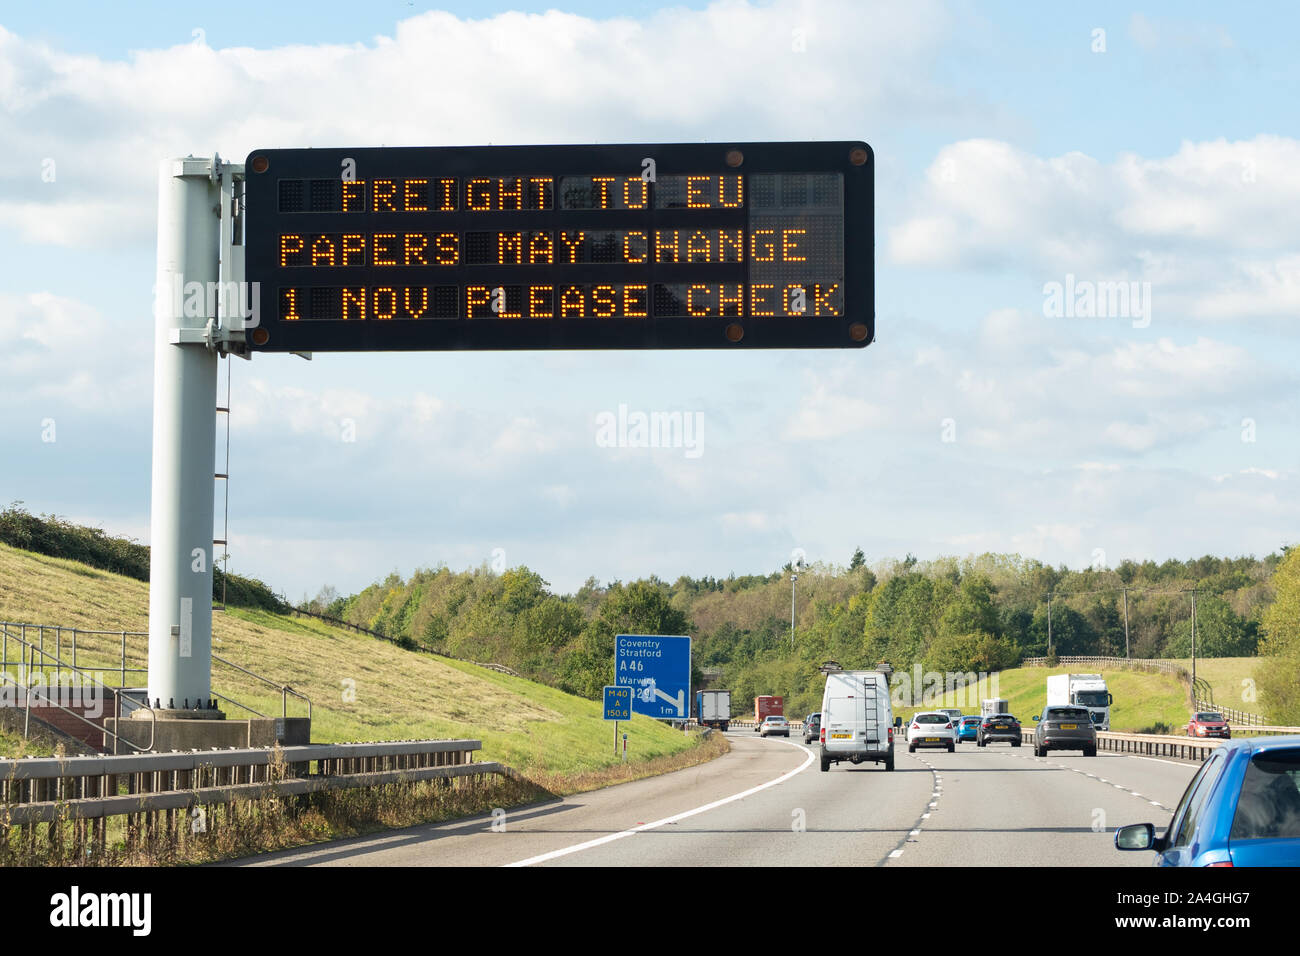 Brexit Preparation - information on motorway matrix sign - 'Freight to EU Papers may change 1 Nov please check' - M40 near Coventry, England, UK Stock Photo